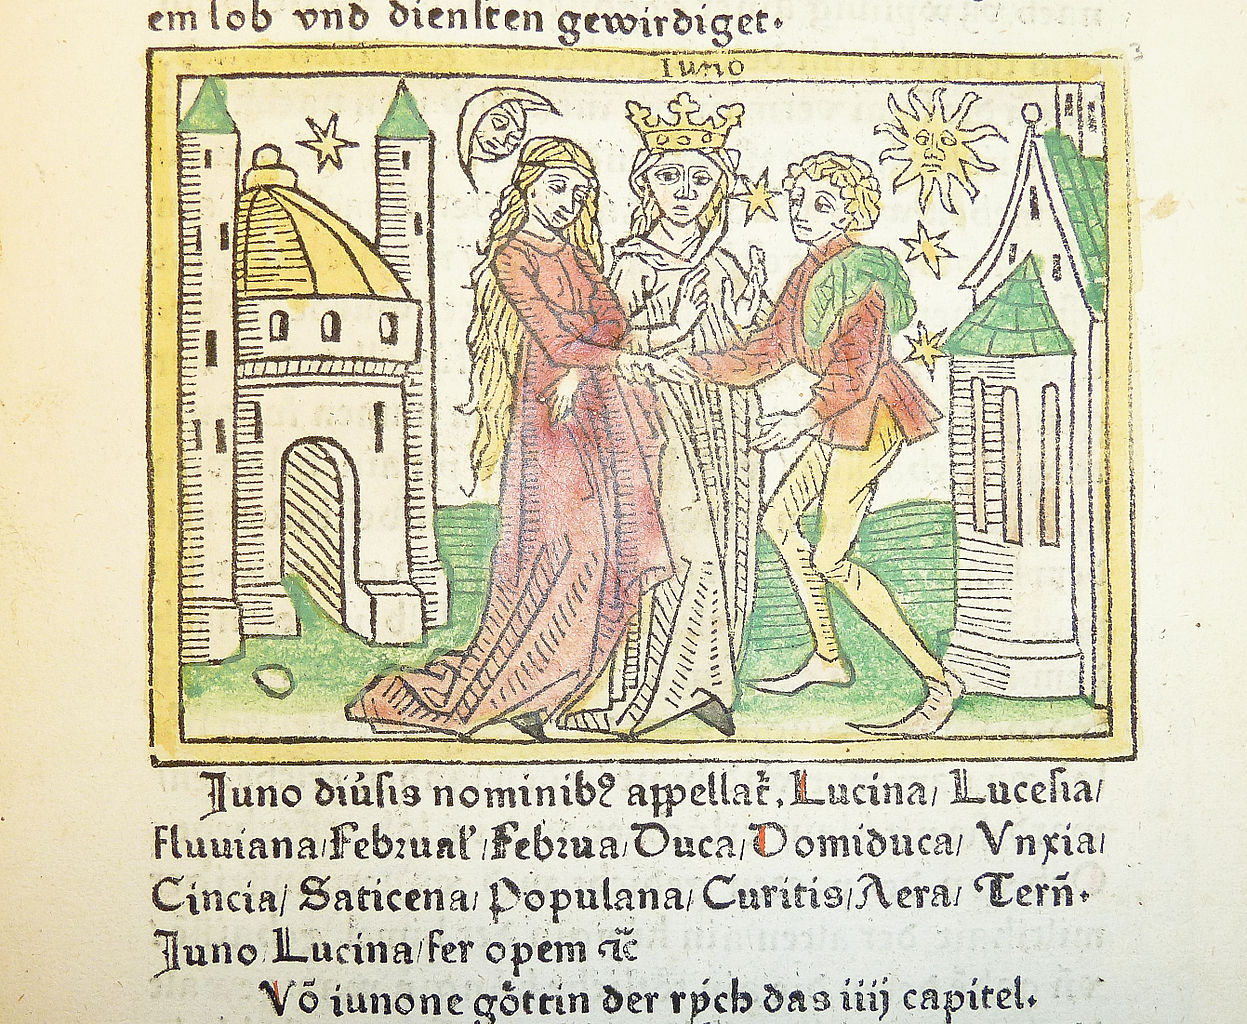 A 15th-century woodcut illustration of the goddess Juno as patron of marriage, hand-colored in red, green, yellow and black. (Photo: Wikimedia/Penn Provenance Project)